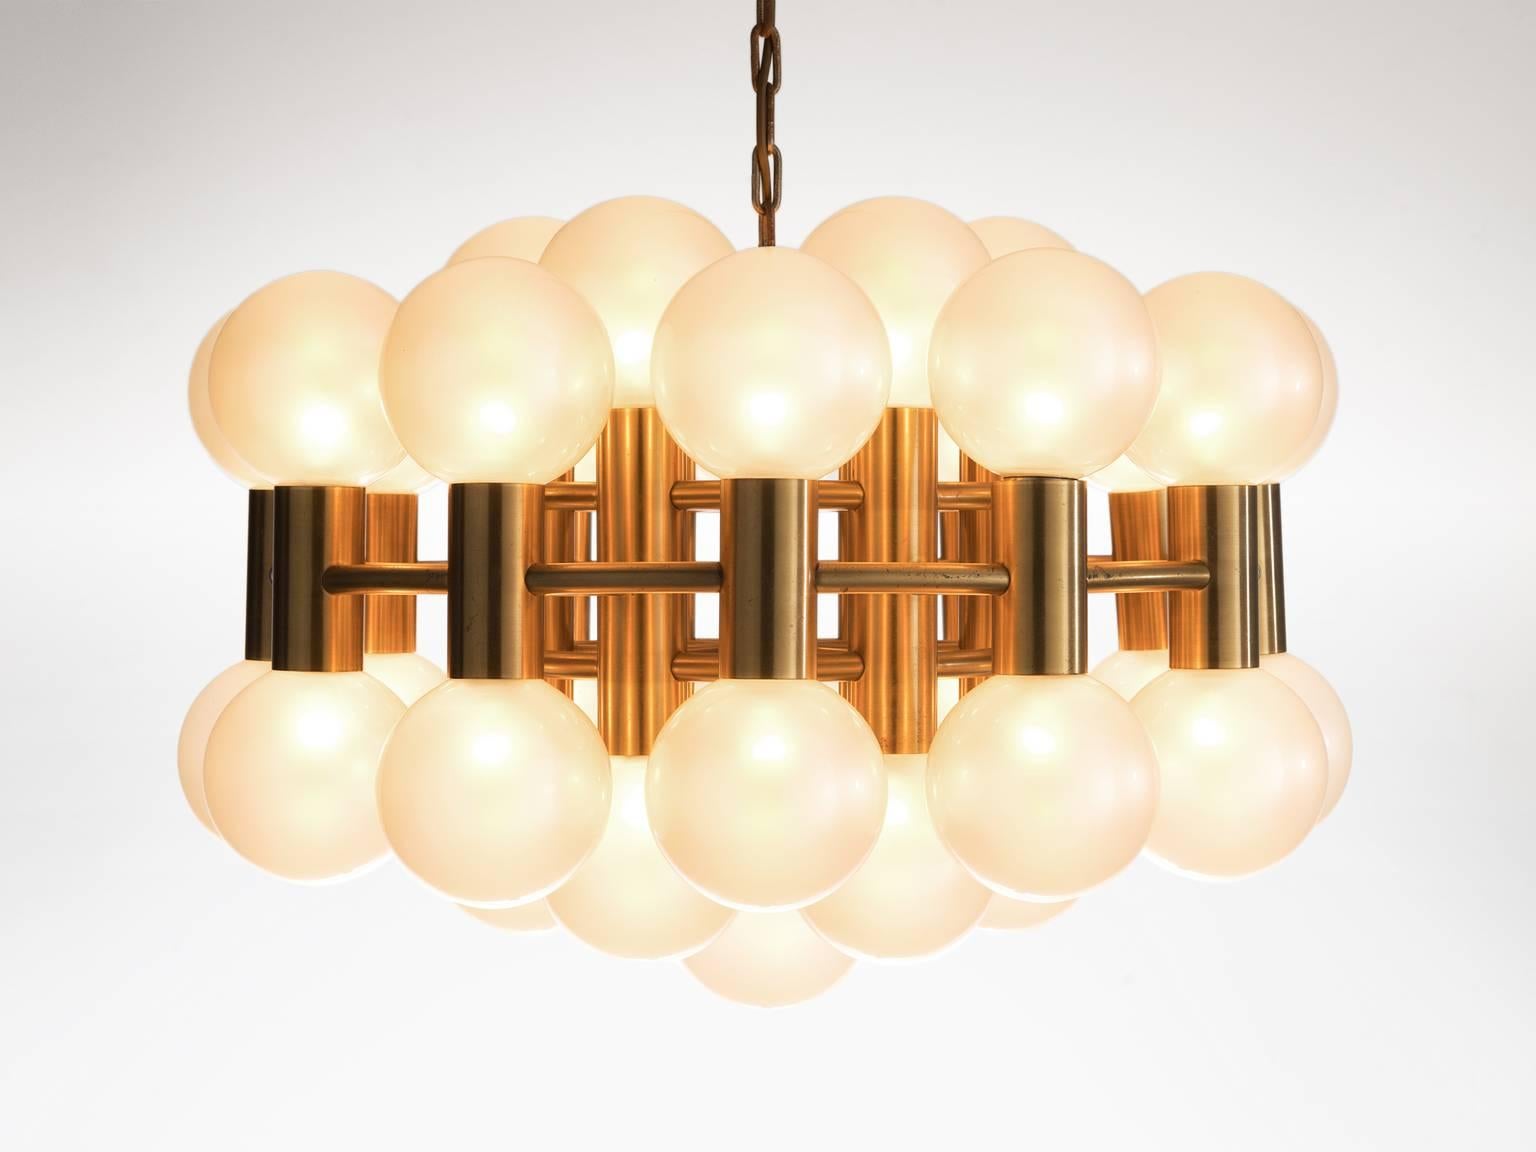 Chandelier, glass and metal, by Motoko Ishii for Staff, Germany, 1970s. 

This chandelier spreads the light of the large amount of 37 spheres, divided over two levels. The metal frame is nice brass-gold colored, which beautifully combines with the